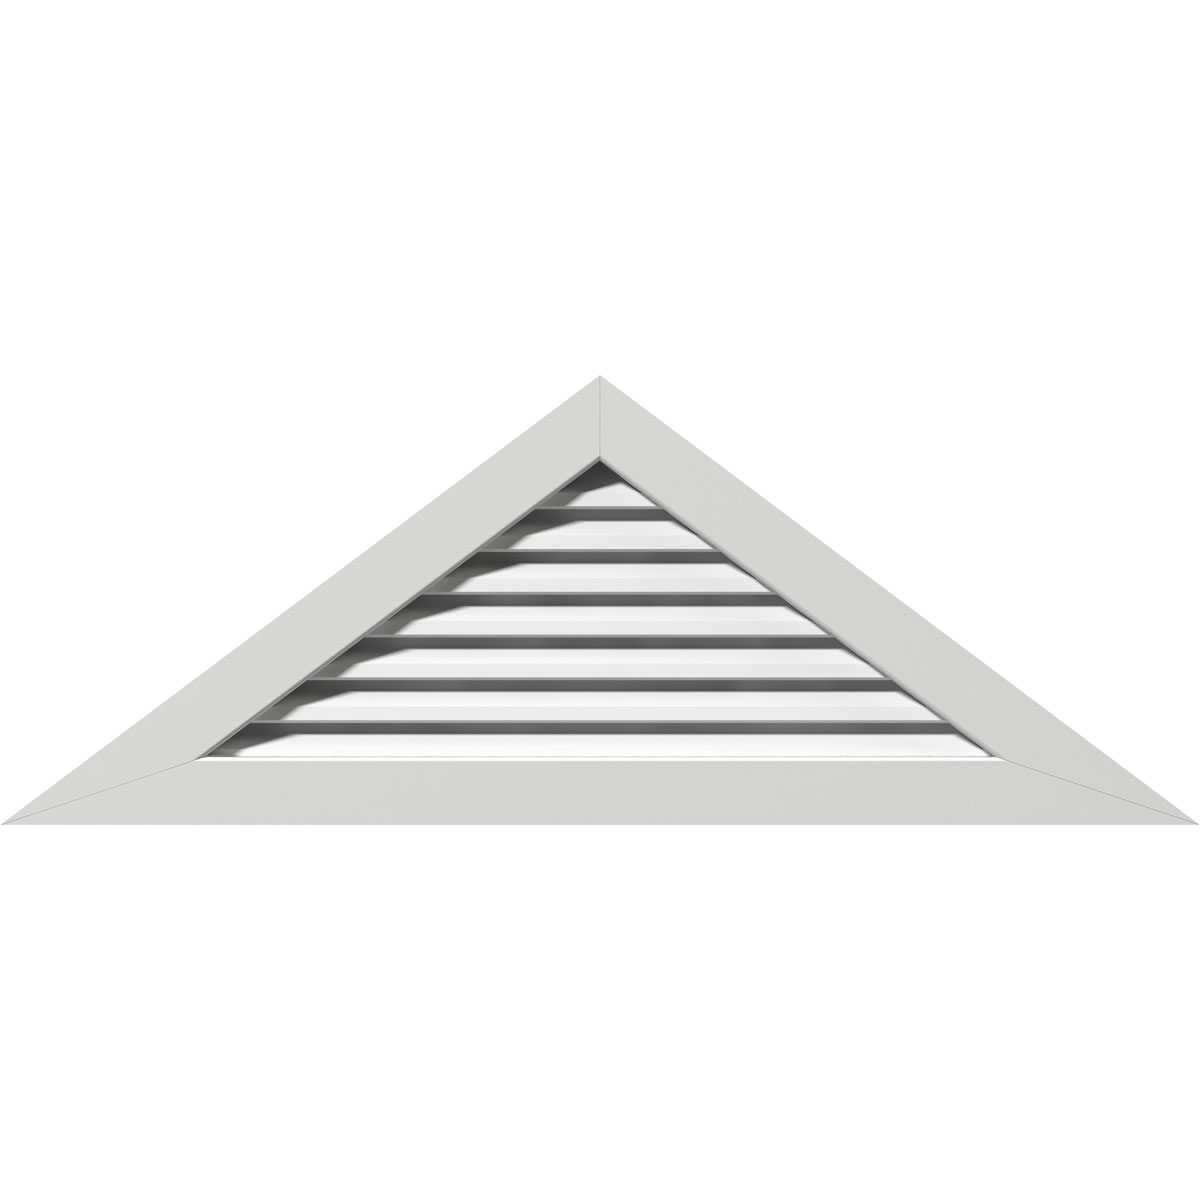 Ekena Millwork 36"W x 15"H Triangle Gable Vent (49 3/4"W x 20 3/4"H Frame Size) 10/12 Pitch Functional, PVC Gable Vent with 1" x 4" Flat Trim Frame - image 1 of 14